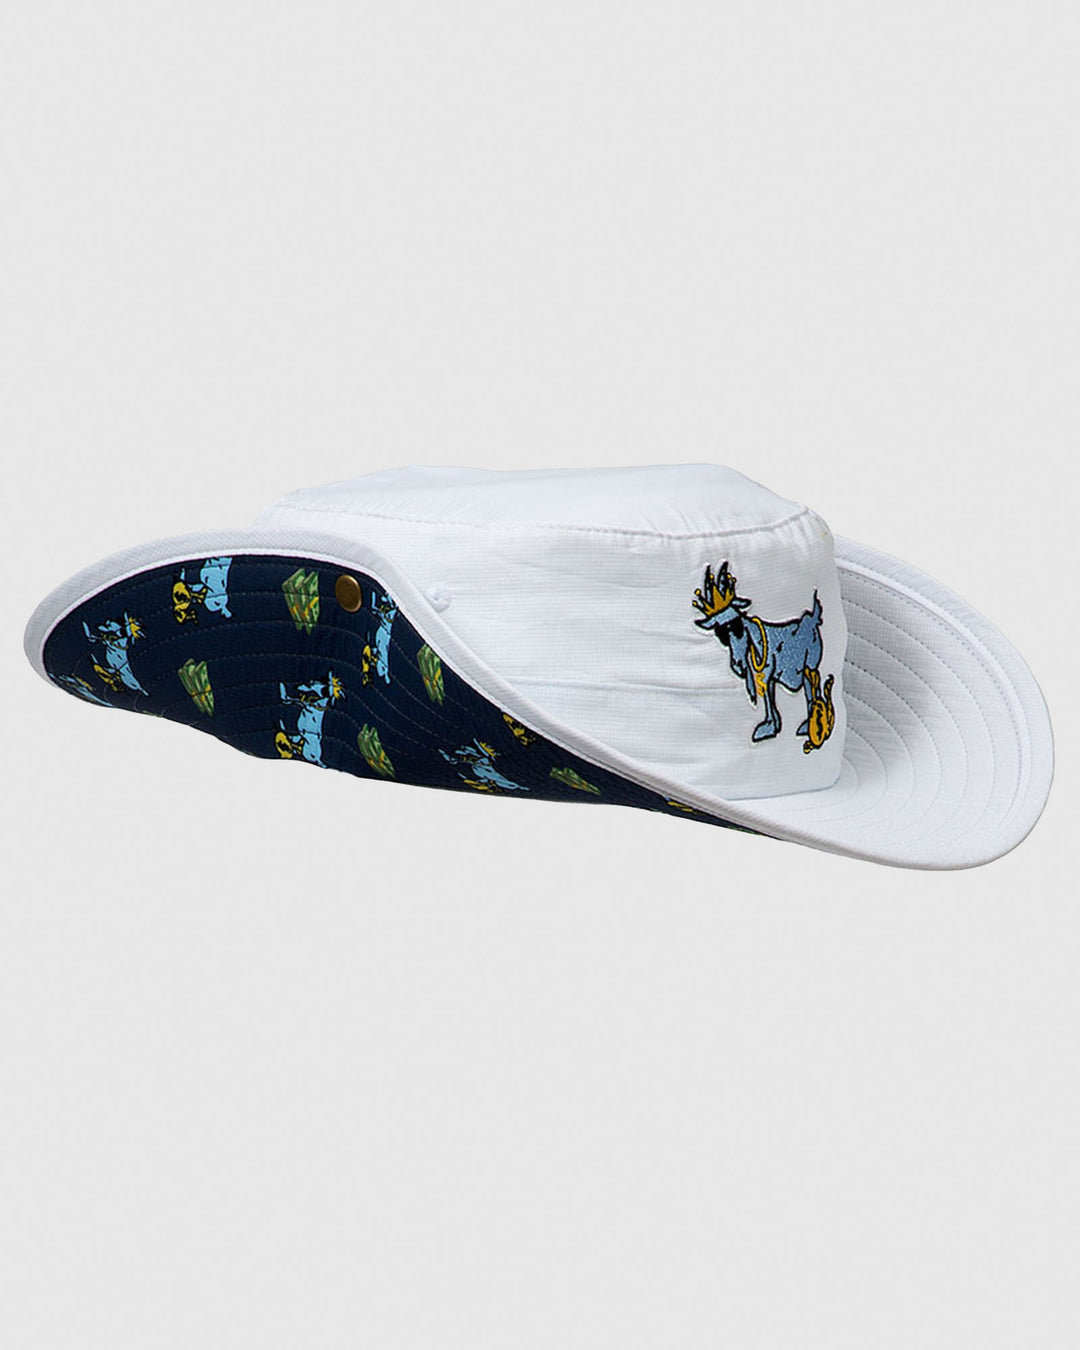 Side of the Cash Money Bucket Hat with flaps up